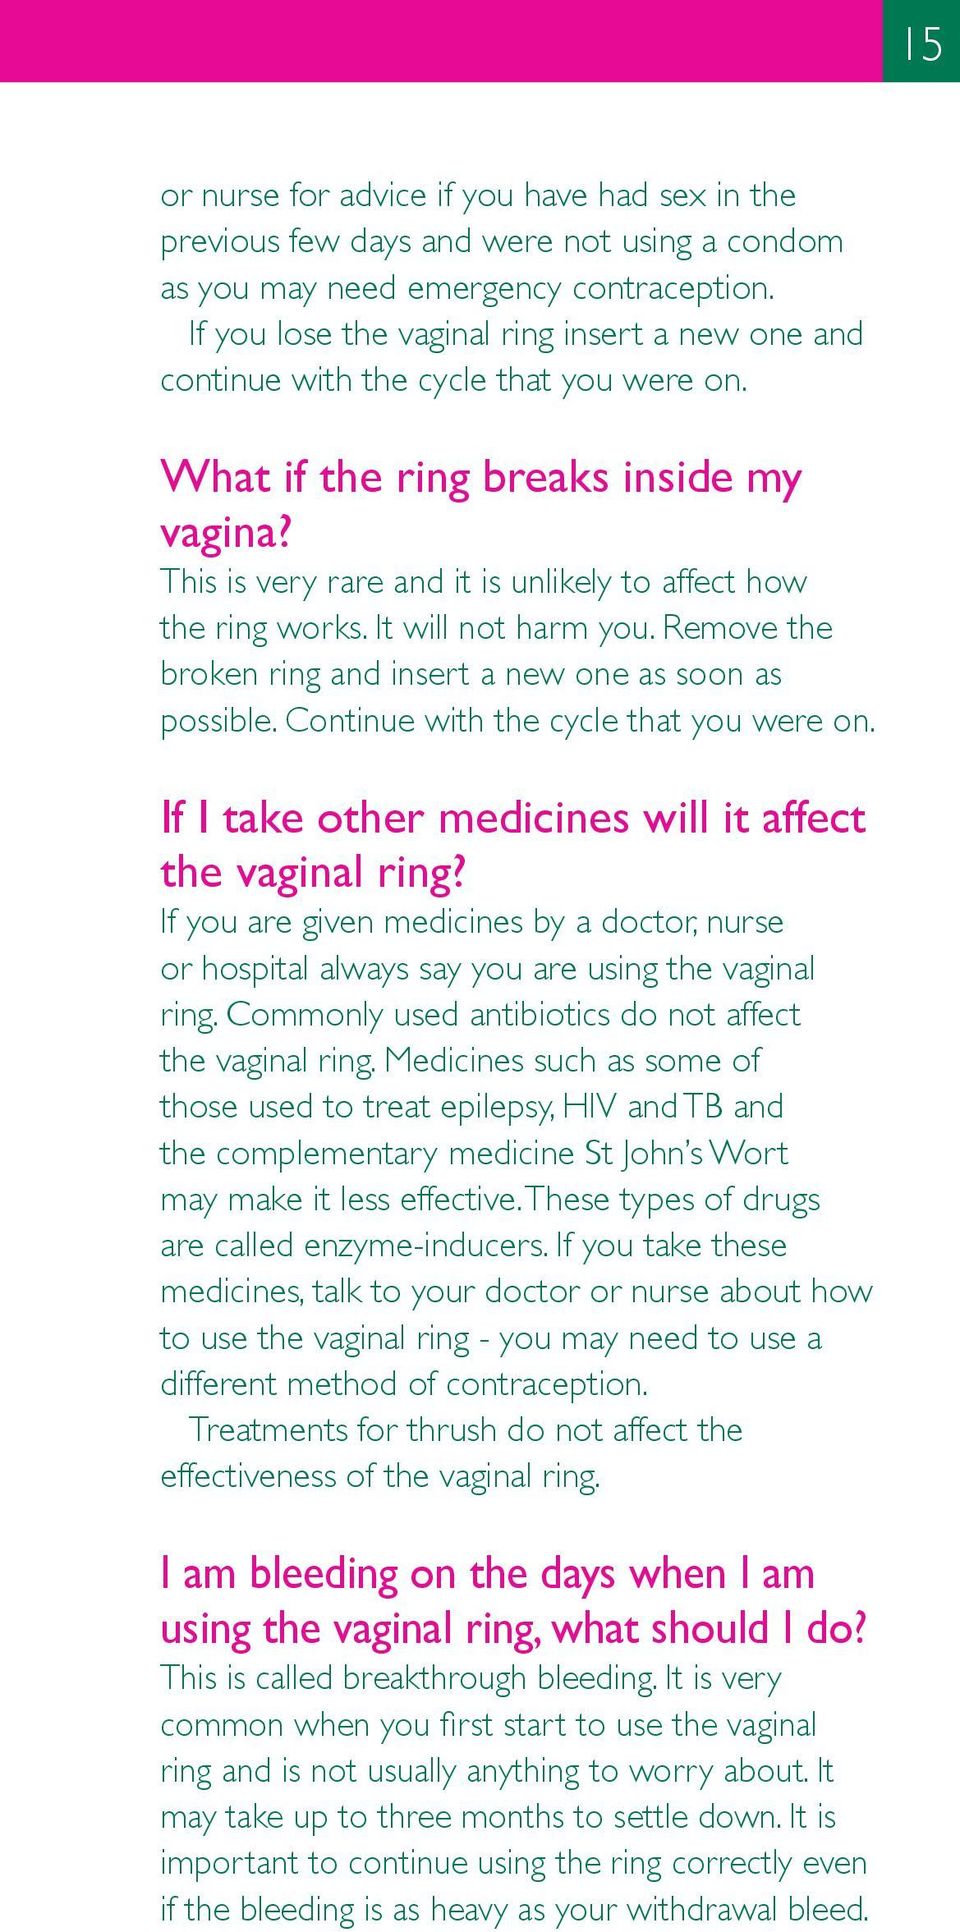 It will not harm you. Remove the broken ring and insert a new one as soon as possible. Continue with the cycle that you were on. If I take other medicines will it affect the vaginal ring?